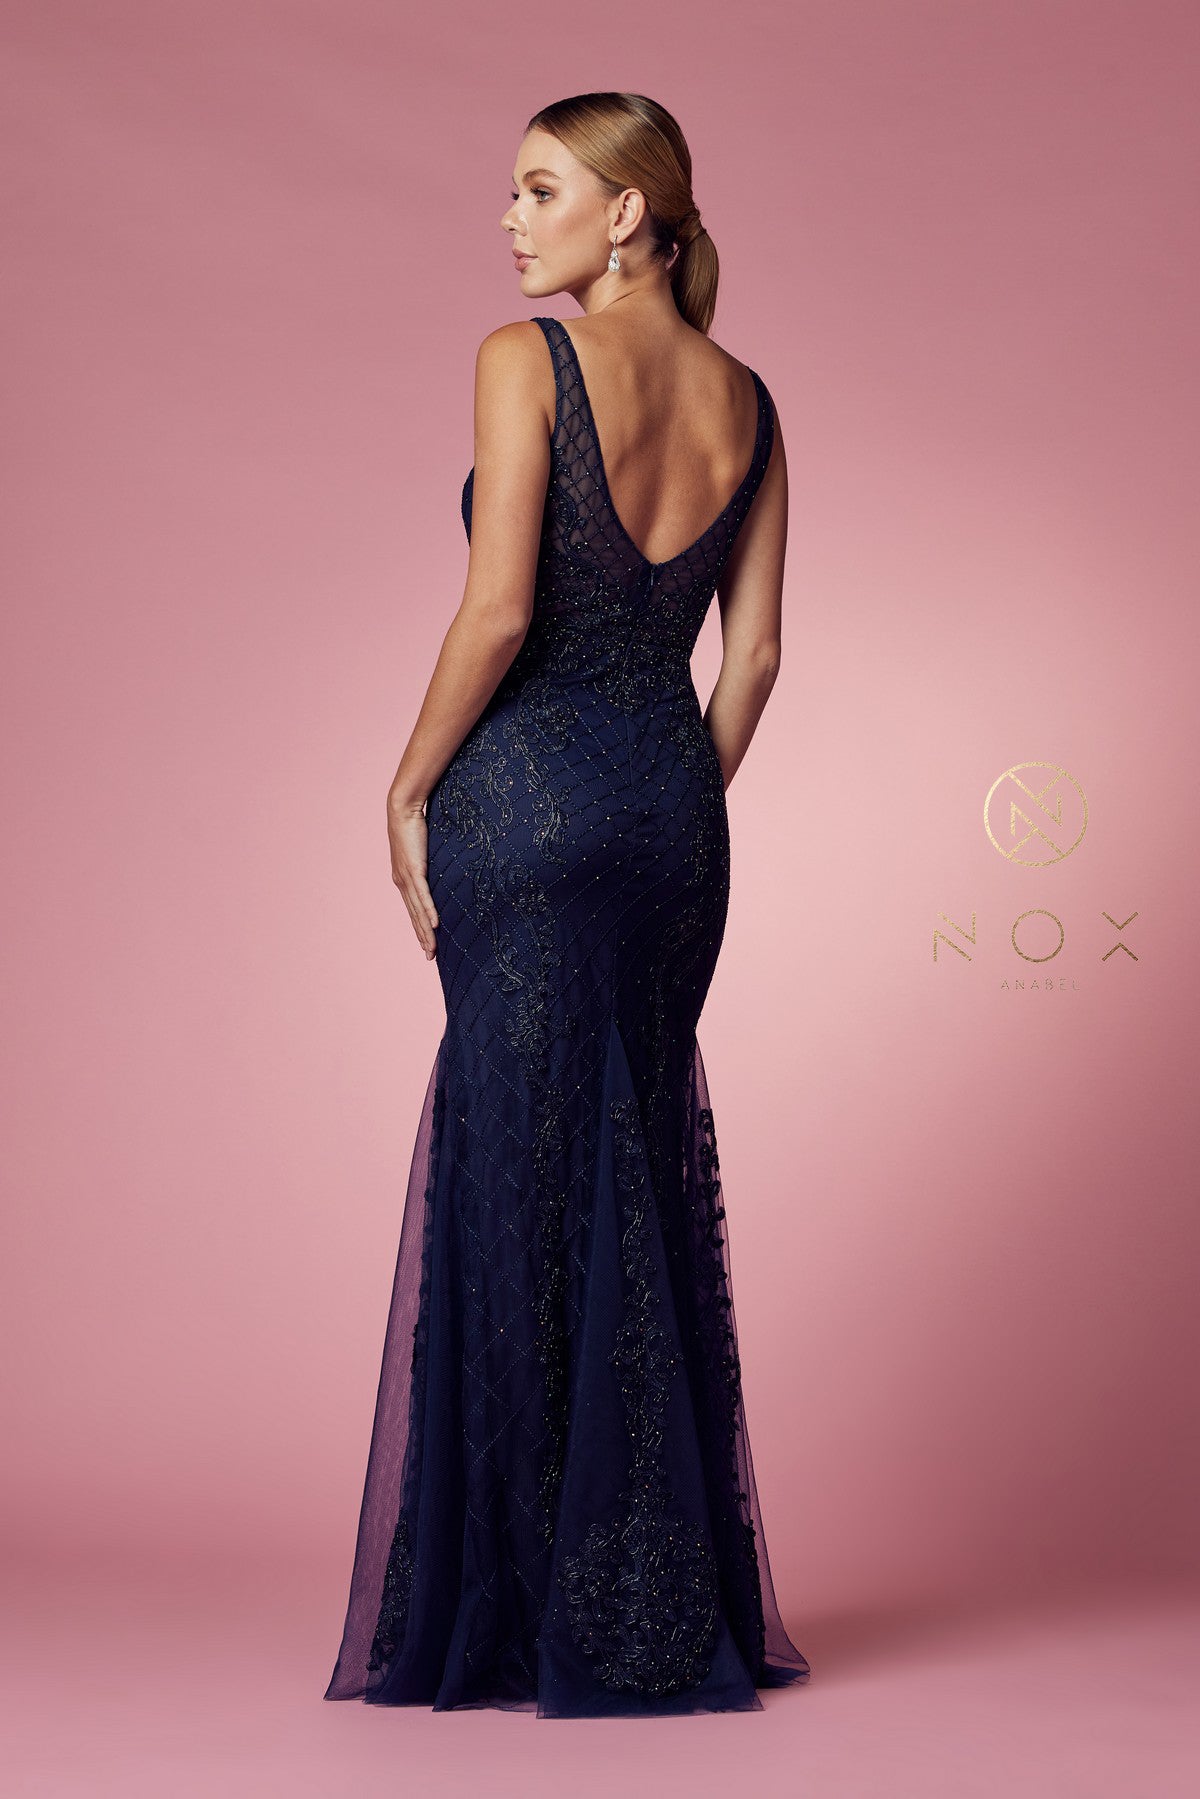 Nox Anabel A398 Long Embellished Lace Formal Evening Gown Prom Dress Wedding Guest Fulfill your wish to look like a princess with this long mermaid dress. The full-length dress comes with a deep V-neck design and an open back which makes it an excellent attire to wear at a party. The front and back have alluring embroidery  Available Sizes: 2-16  Available Colors: Burgundy, Gold, Navy Blue, Rose, Black, Lemon, Light Blue, Green